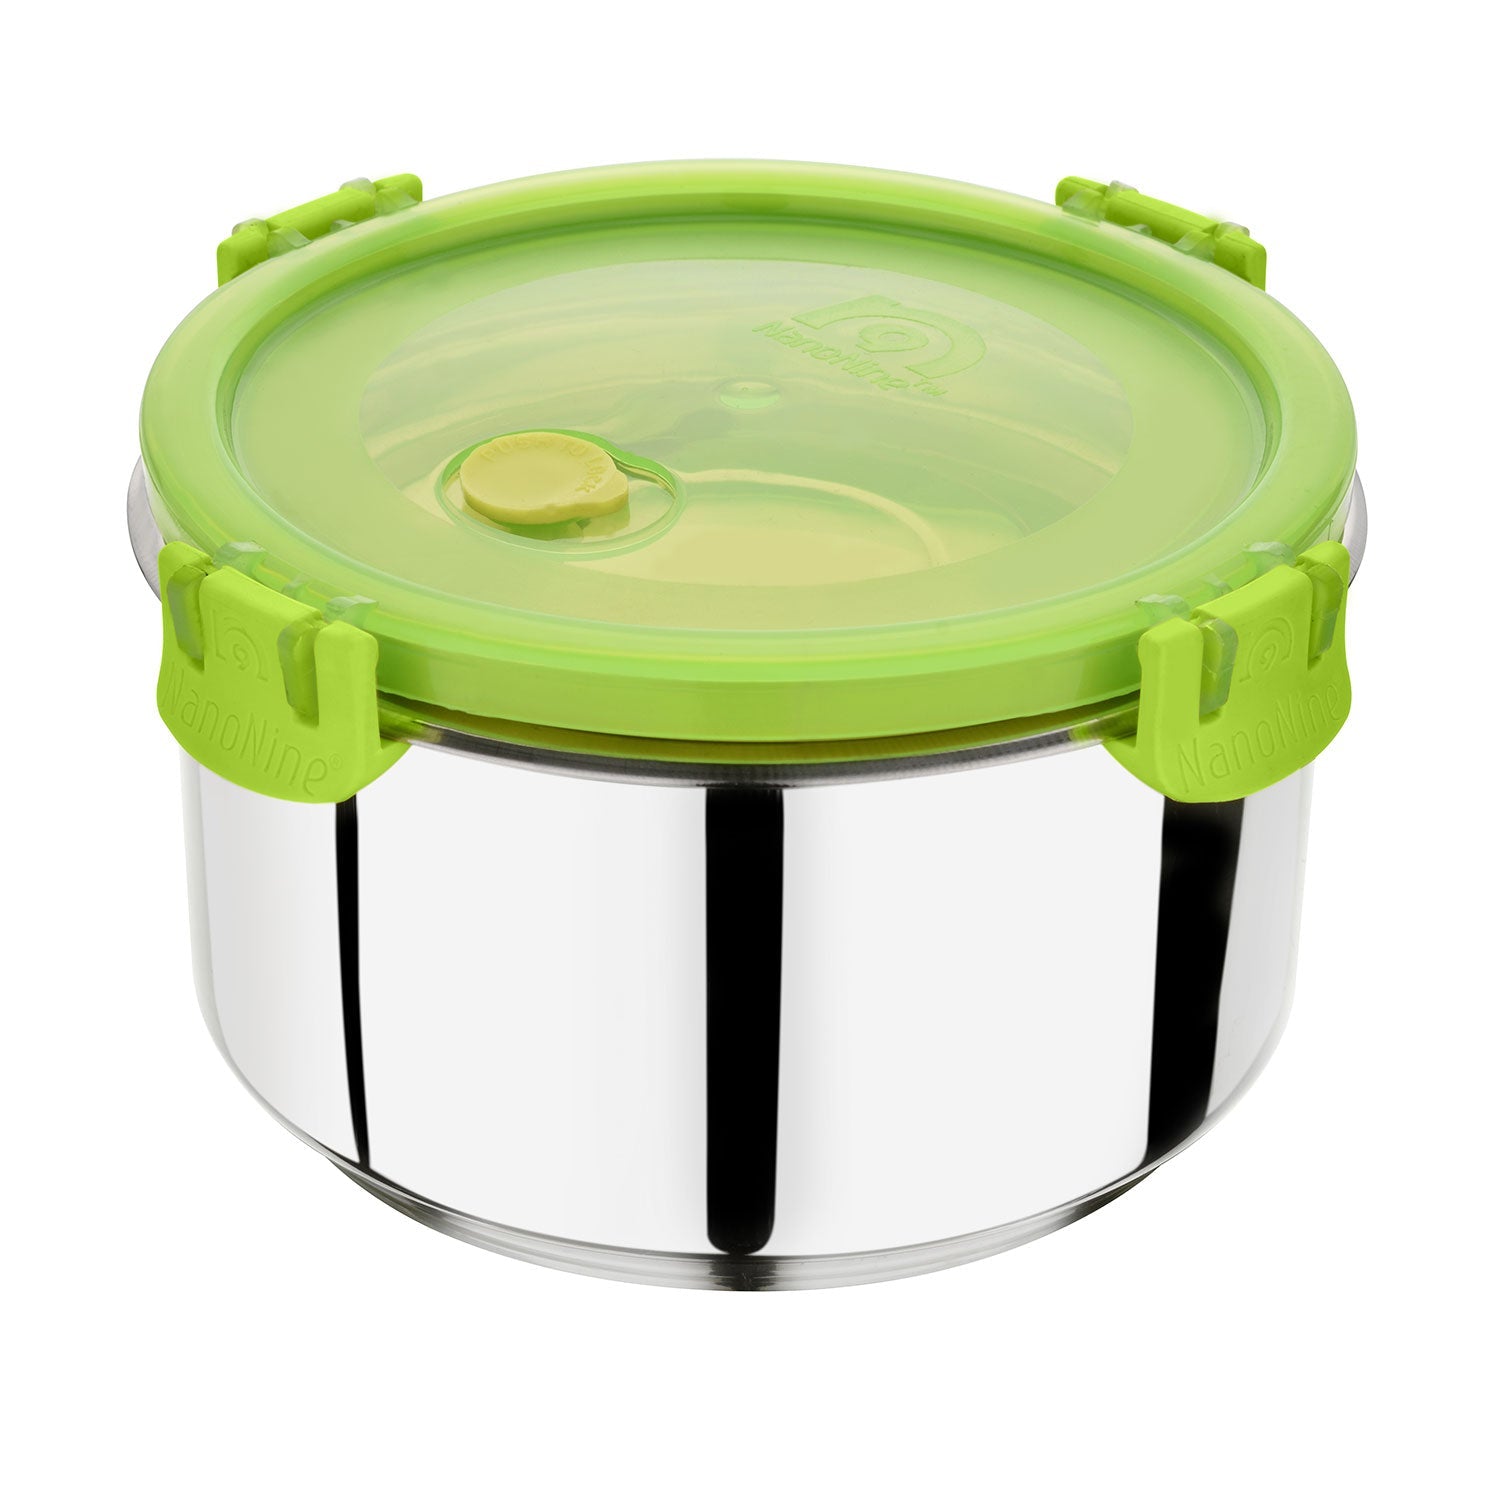 NanoNine Insulock 325 ml Double Wall Insulated Stainless Steel Lunch Box.